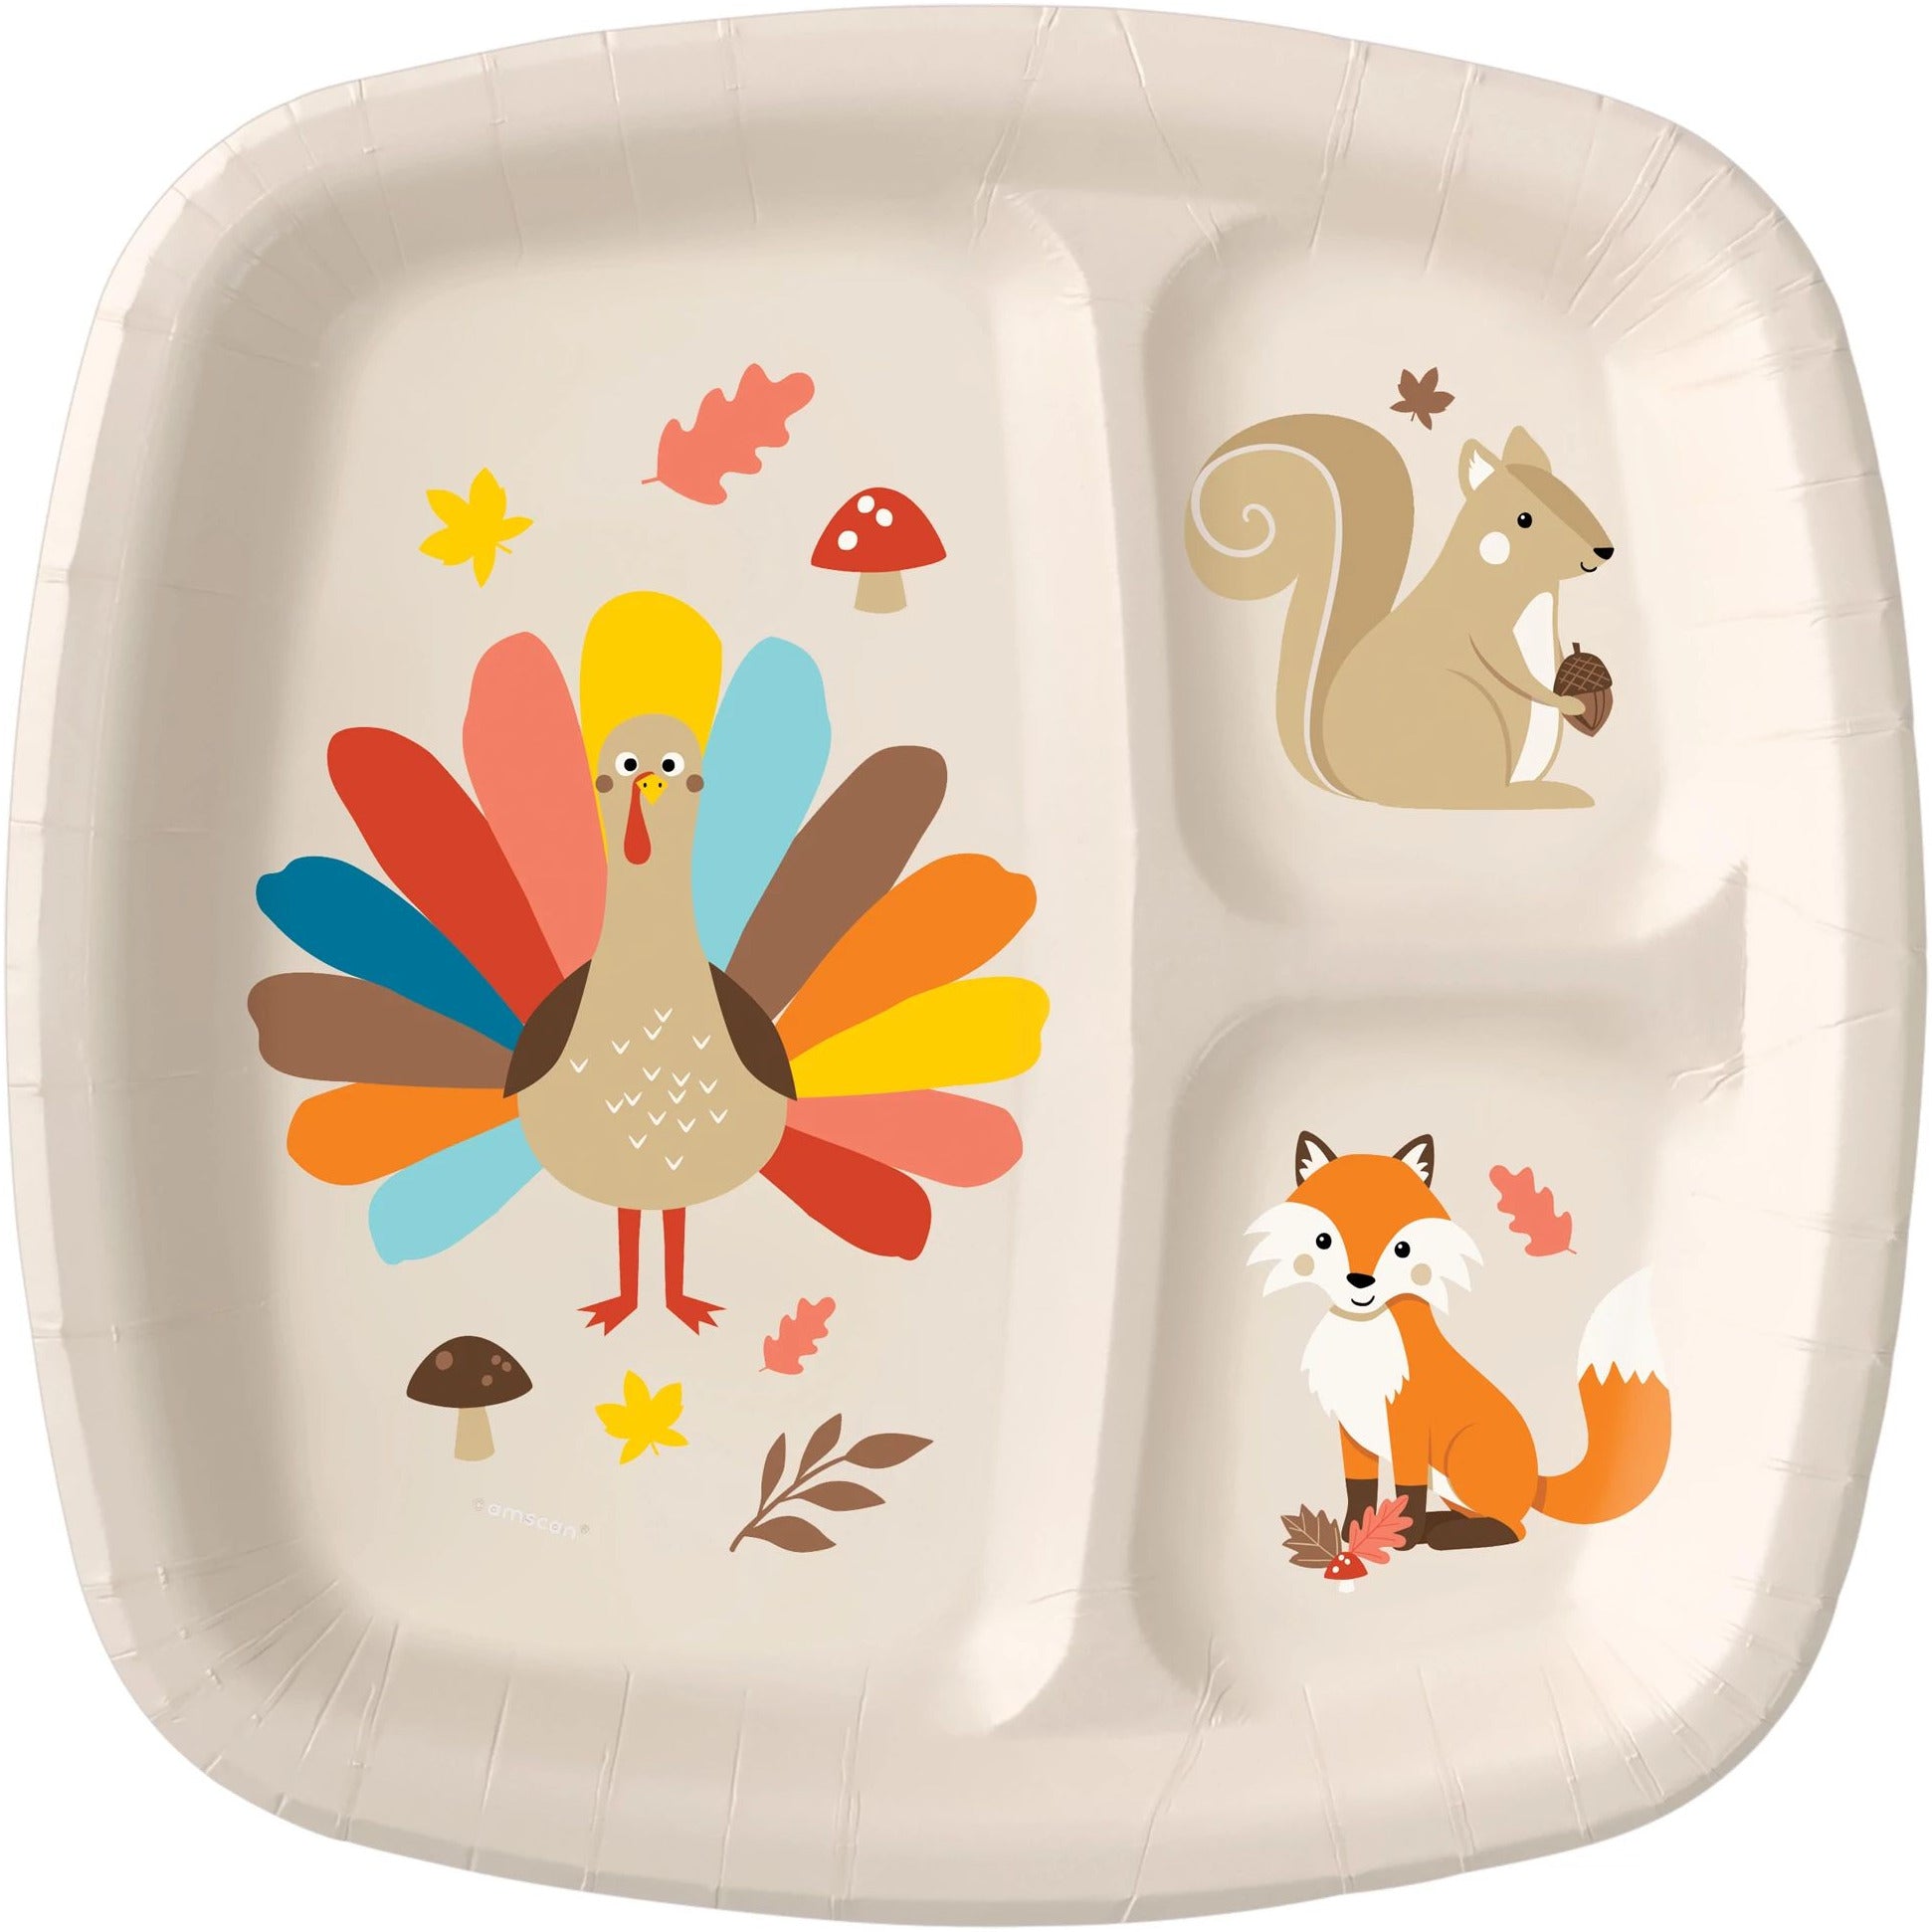 Amscan HOLIDAY: THANKSGIVING Happy Turkey Day Kids Divided Paper Plates